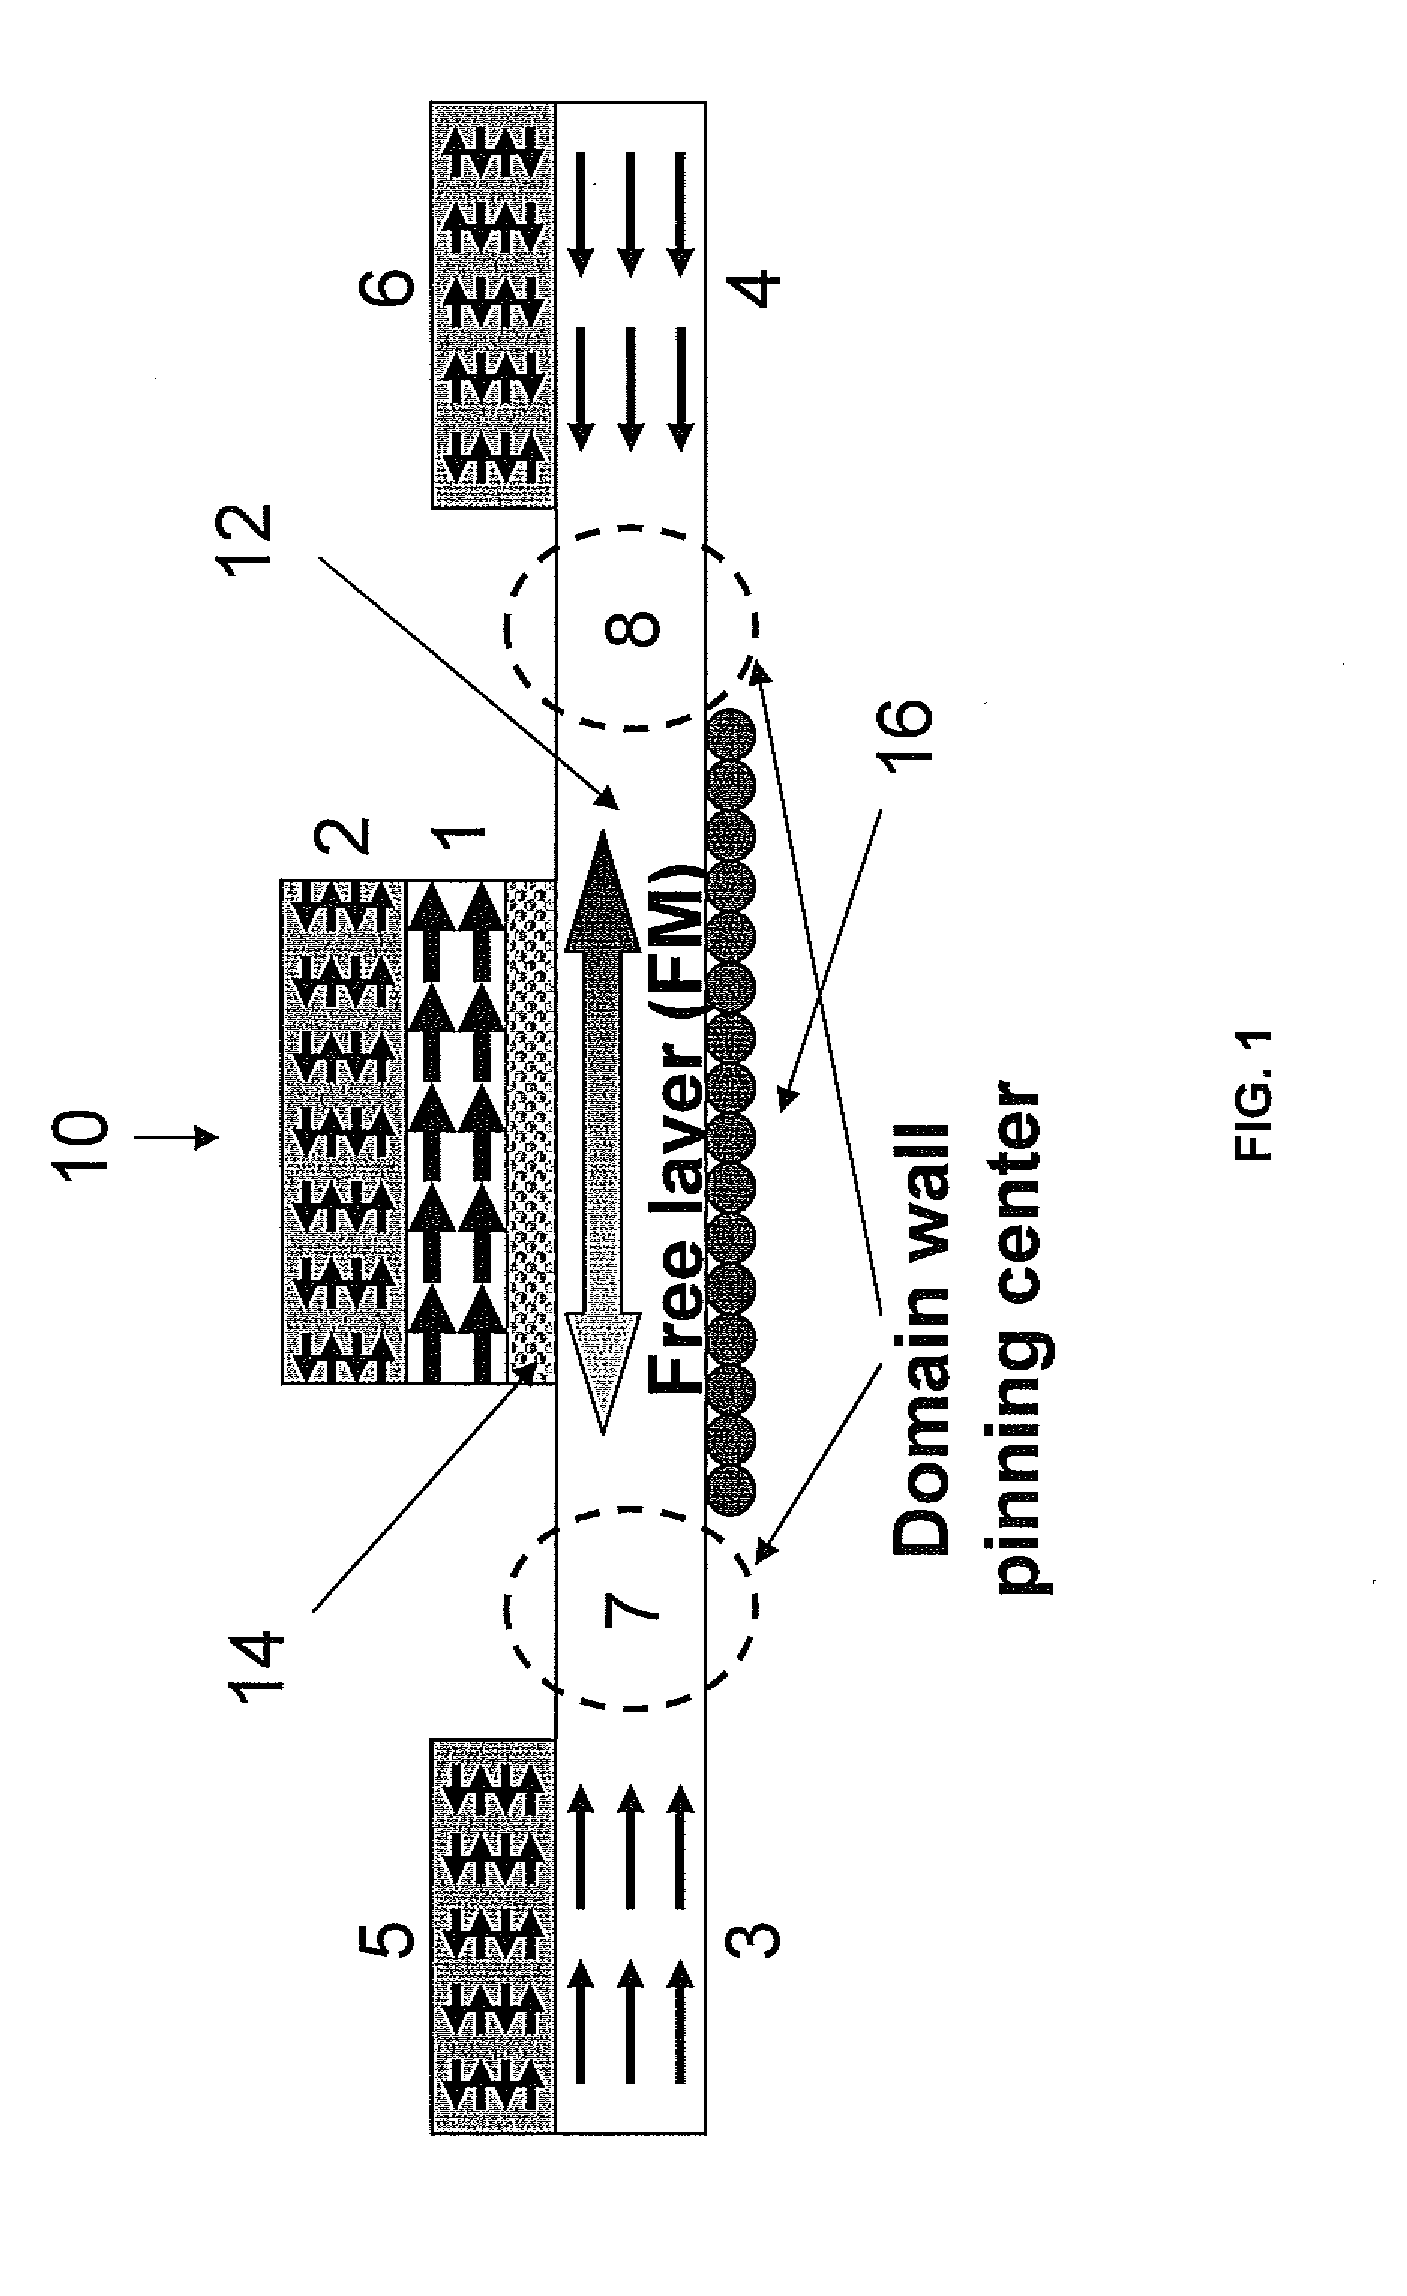 Switching mechanism of magnetic storage cell and logic unit using current induced domain wall motions